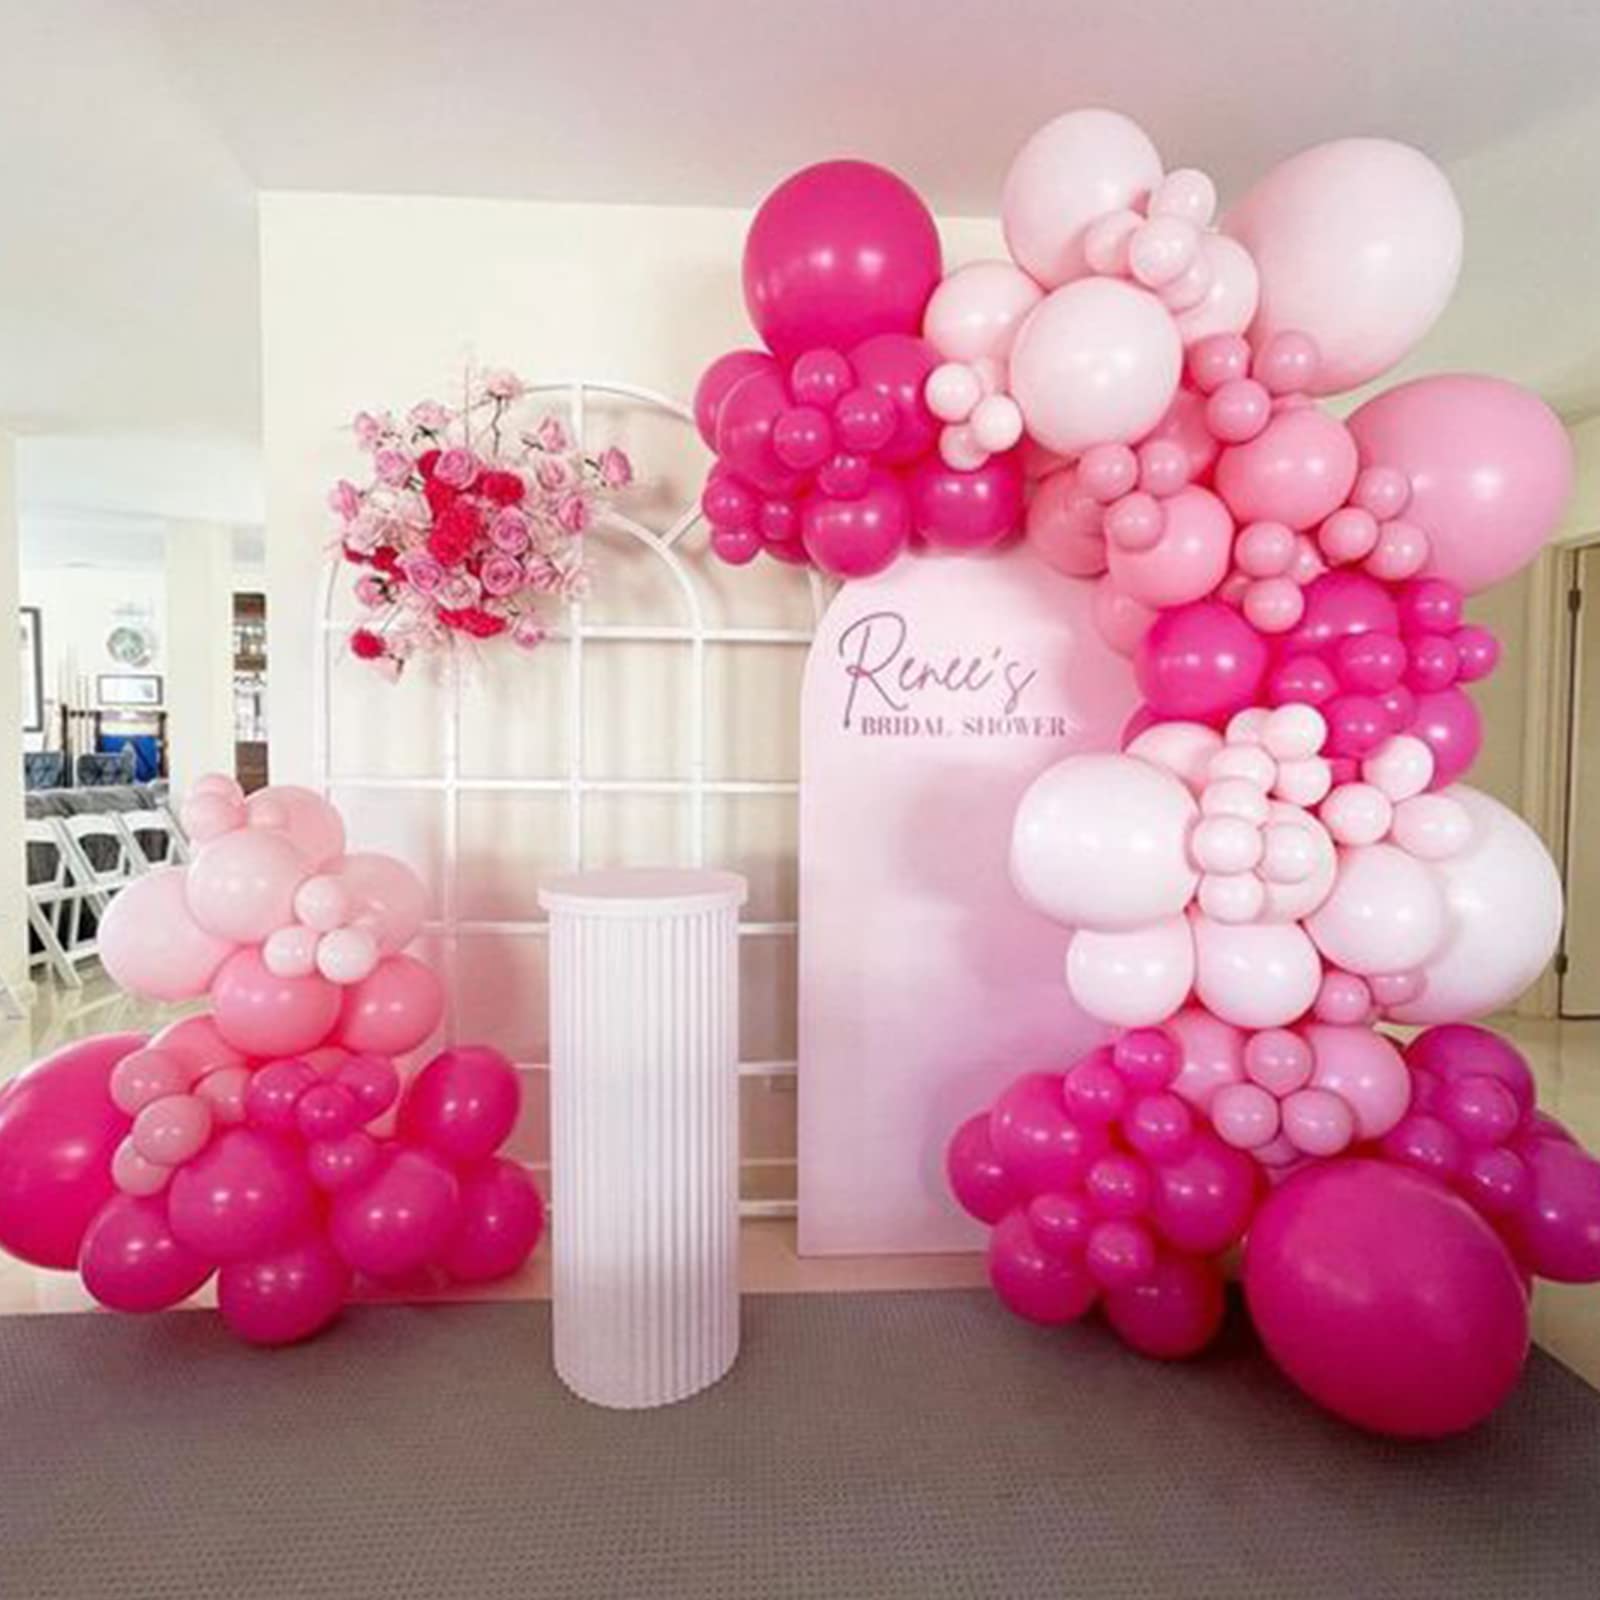 RUBFAC Hot Pink Balloons 105pcs and Pastel Pink Balloons 129pcs,Different Sizes 5/10/12/18 Inch for Garland Arch, for Wedding Birthday Anniversary Valentine's Day Theme Party Decoration